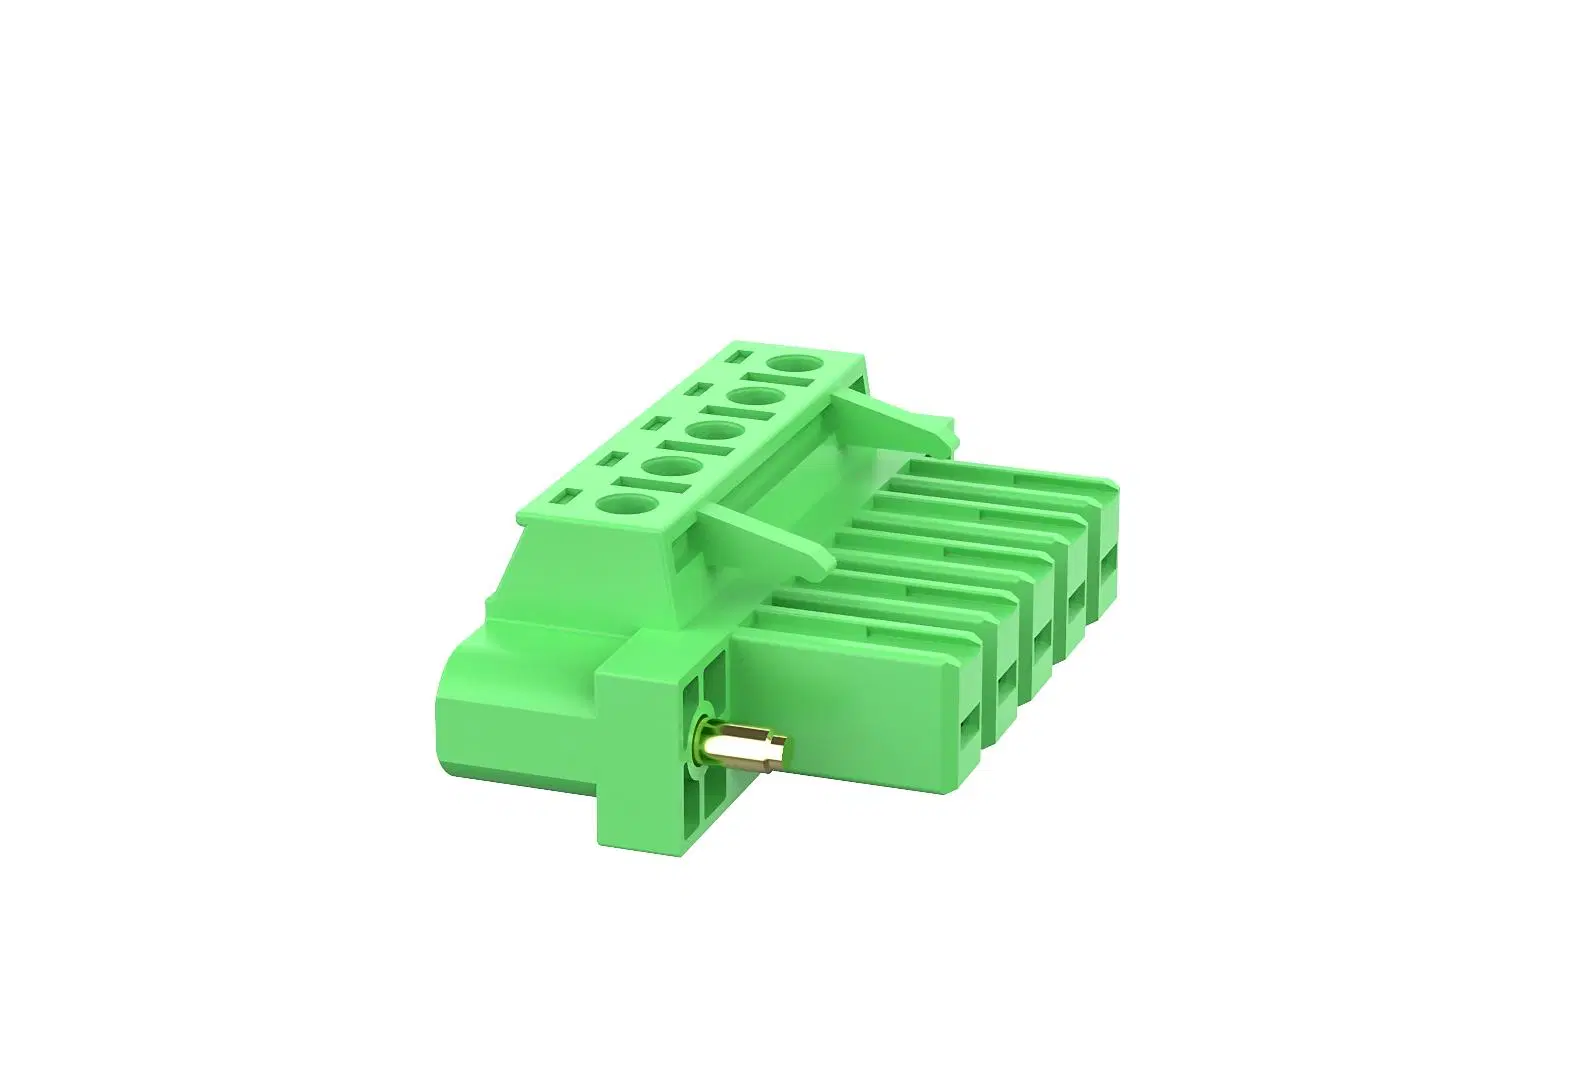 Jiln Sample Customization Terminal Block Easy to Mark and Identify Each Connection Cable Terminal Block Connector